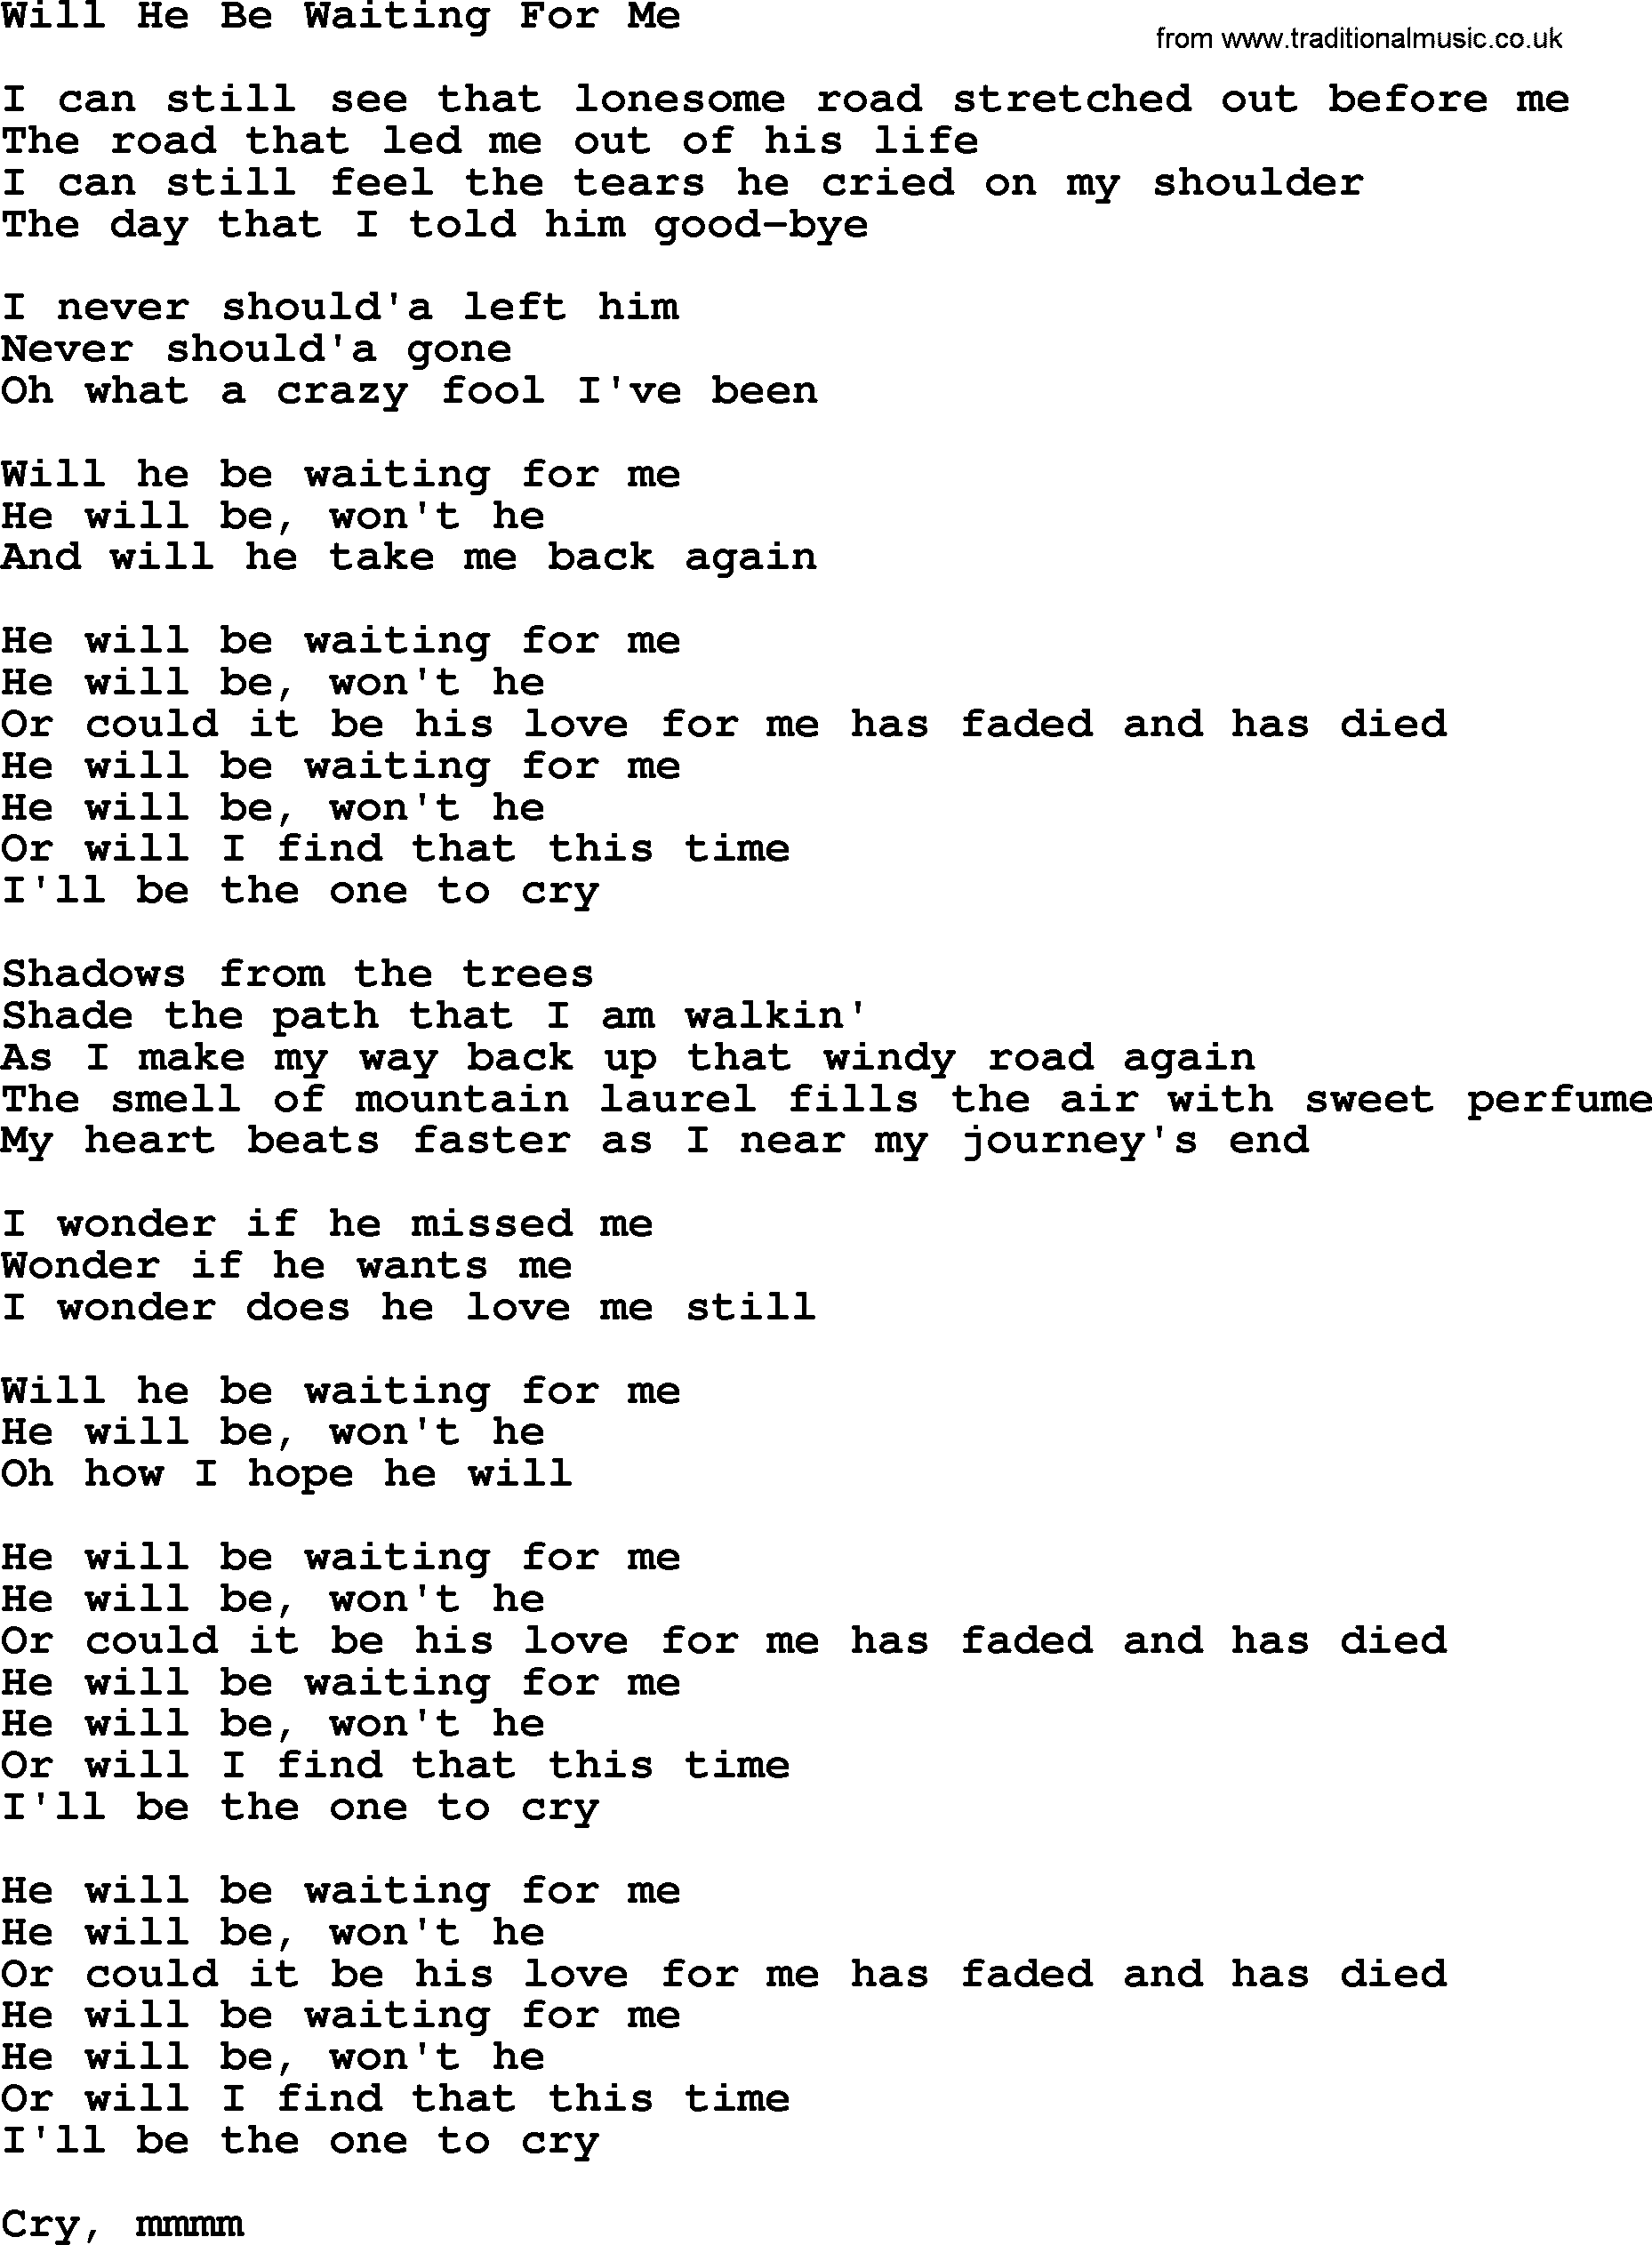 Dolly Parton song Will He Be Waiting For Me.txt lyrics